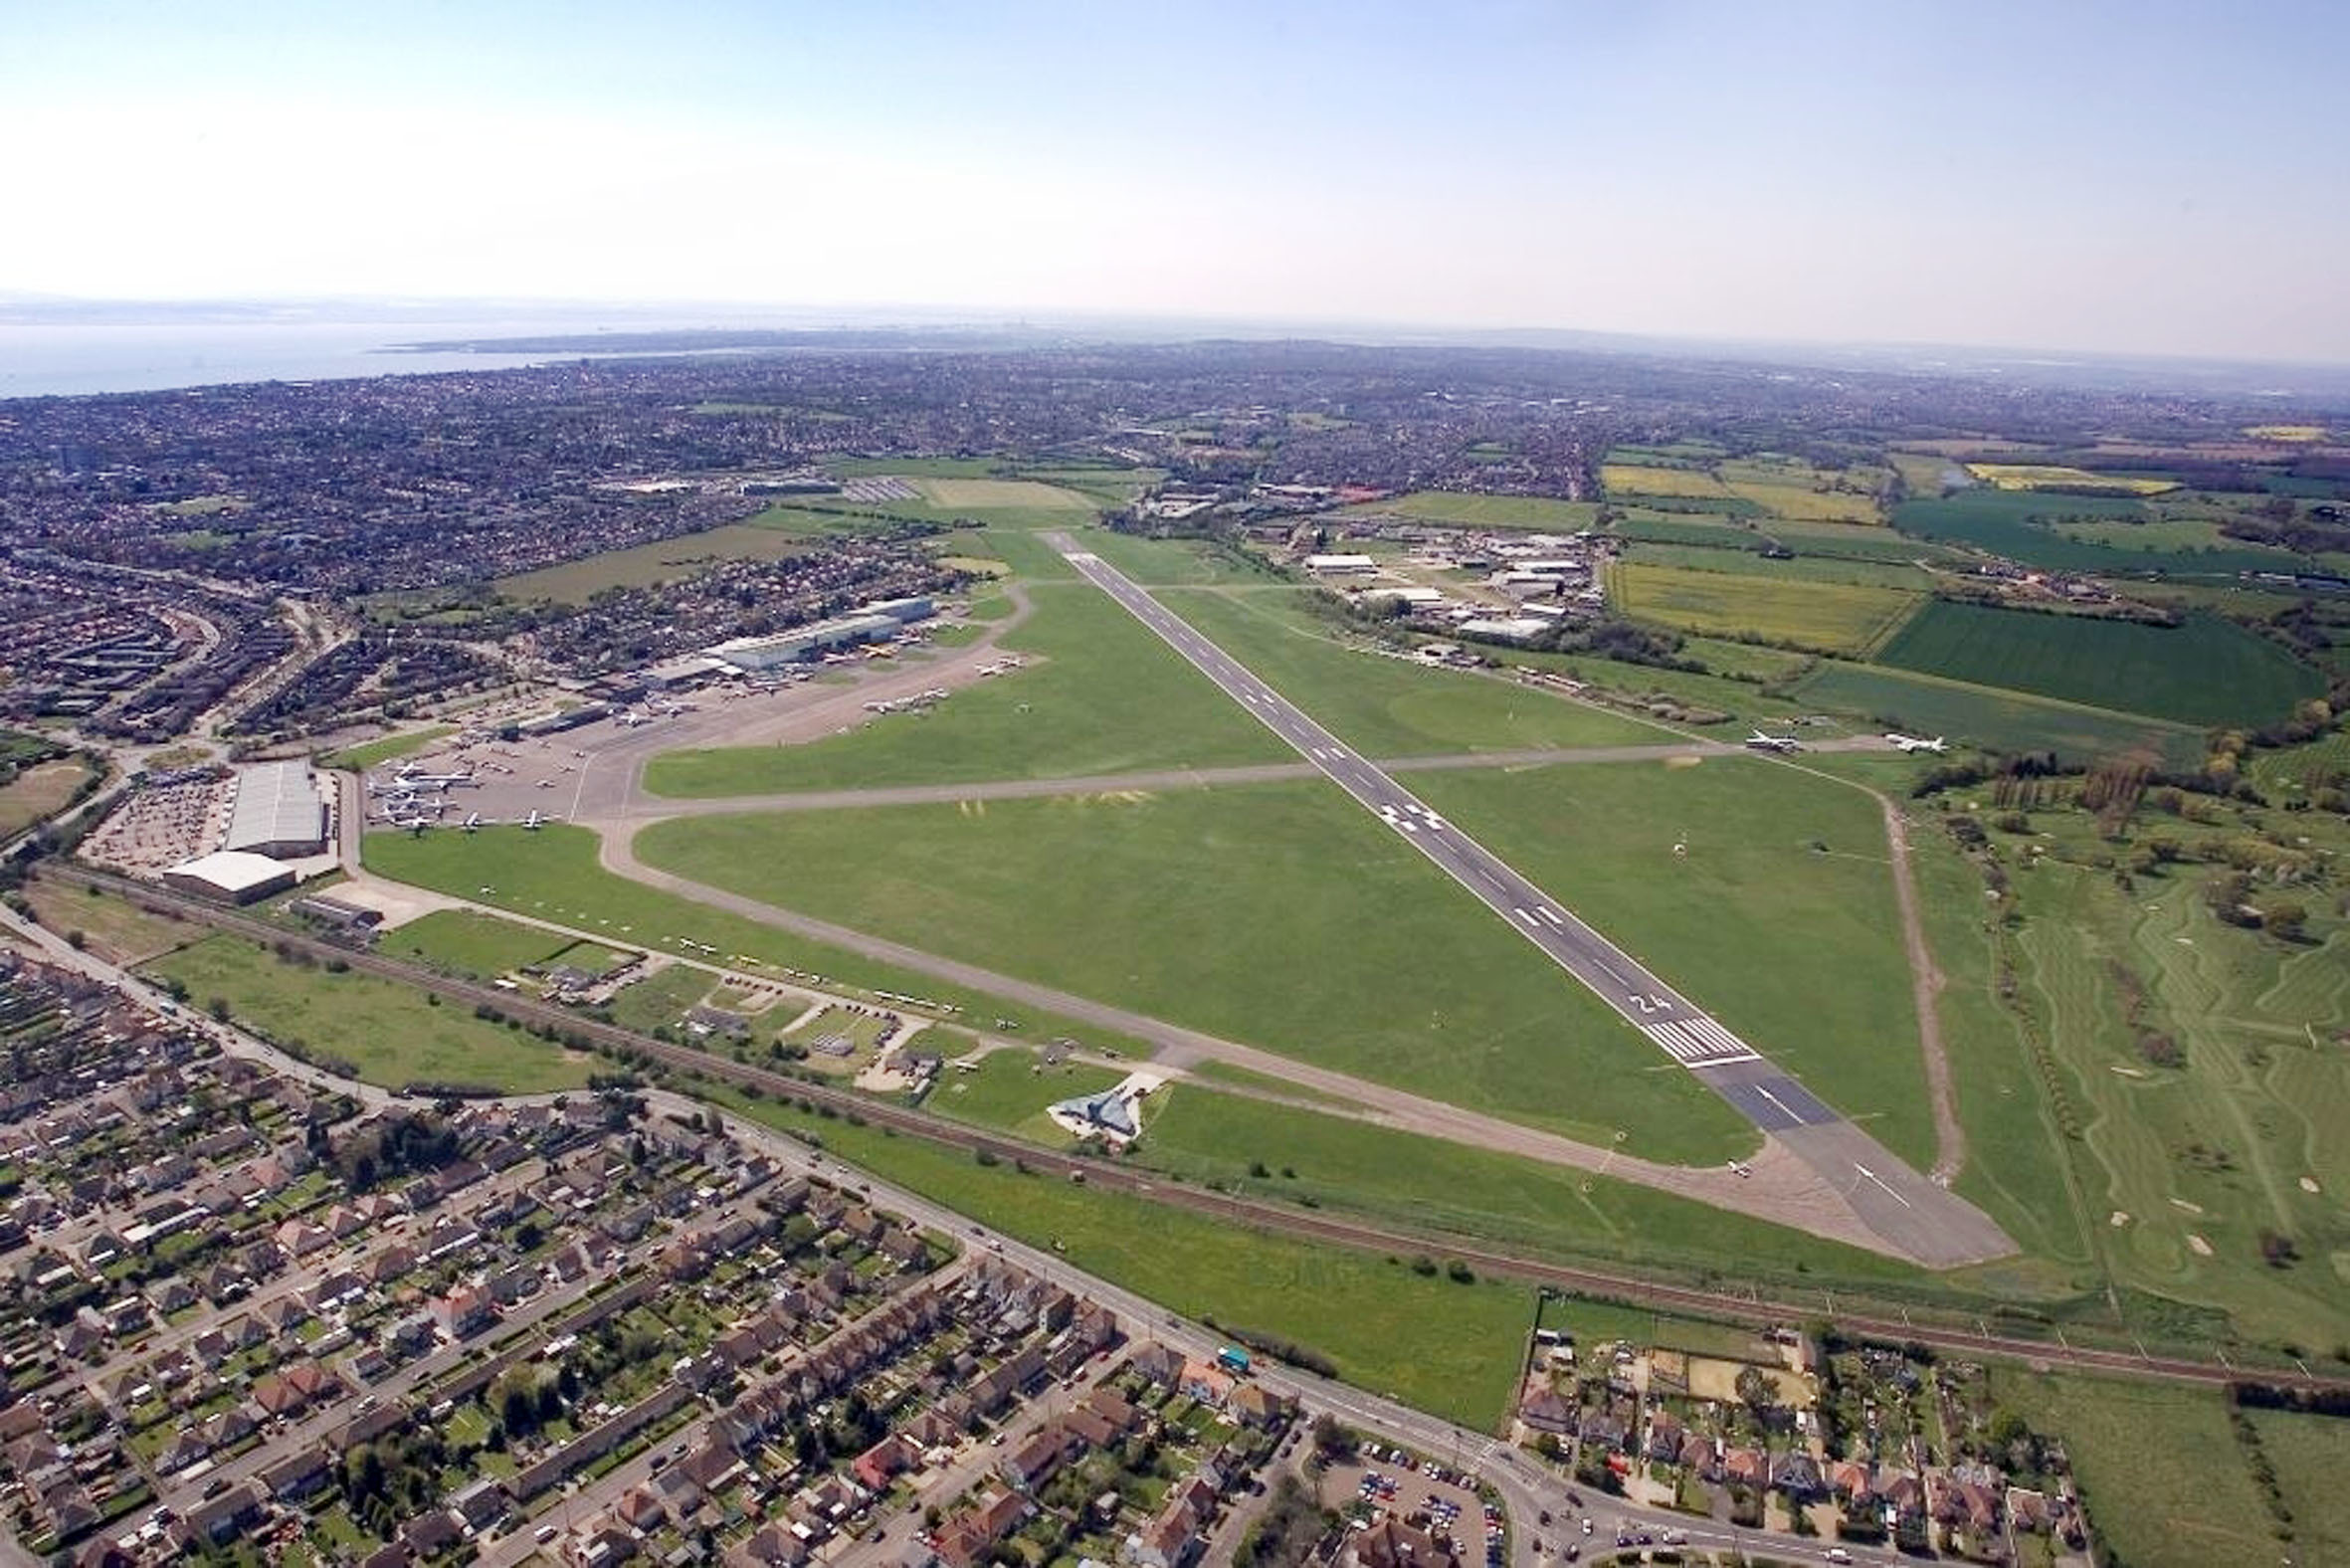 Tragic - the crash came just three minutes after taking off from Southend Airport